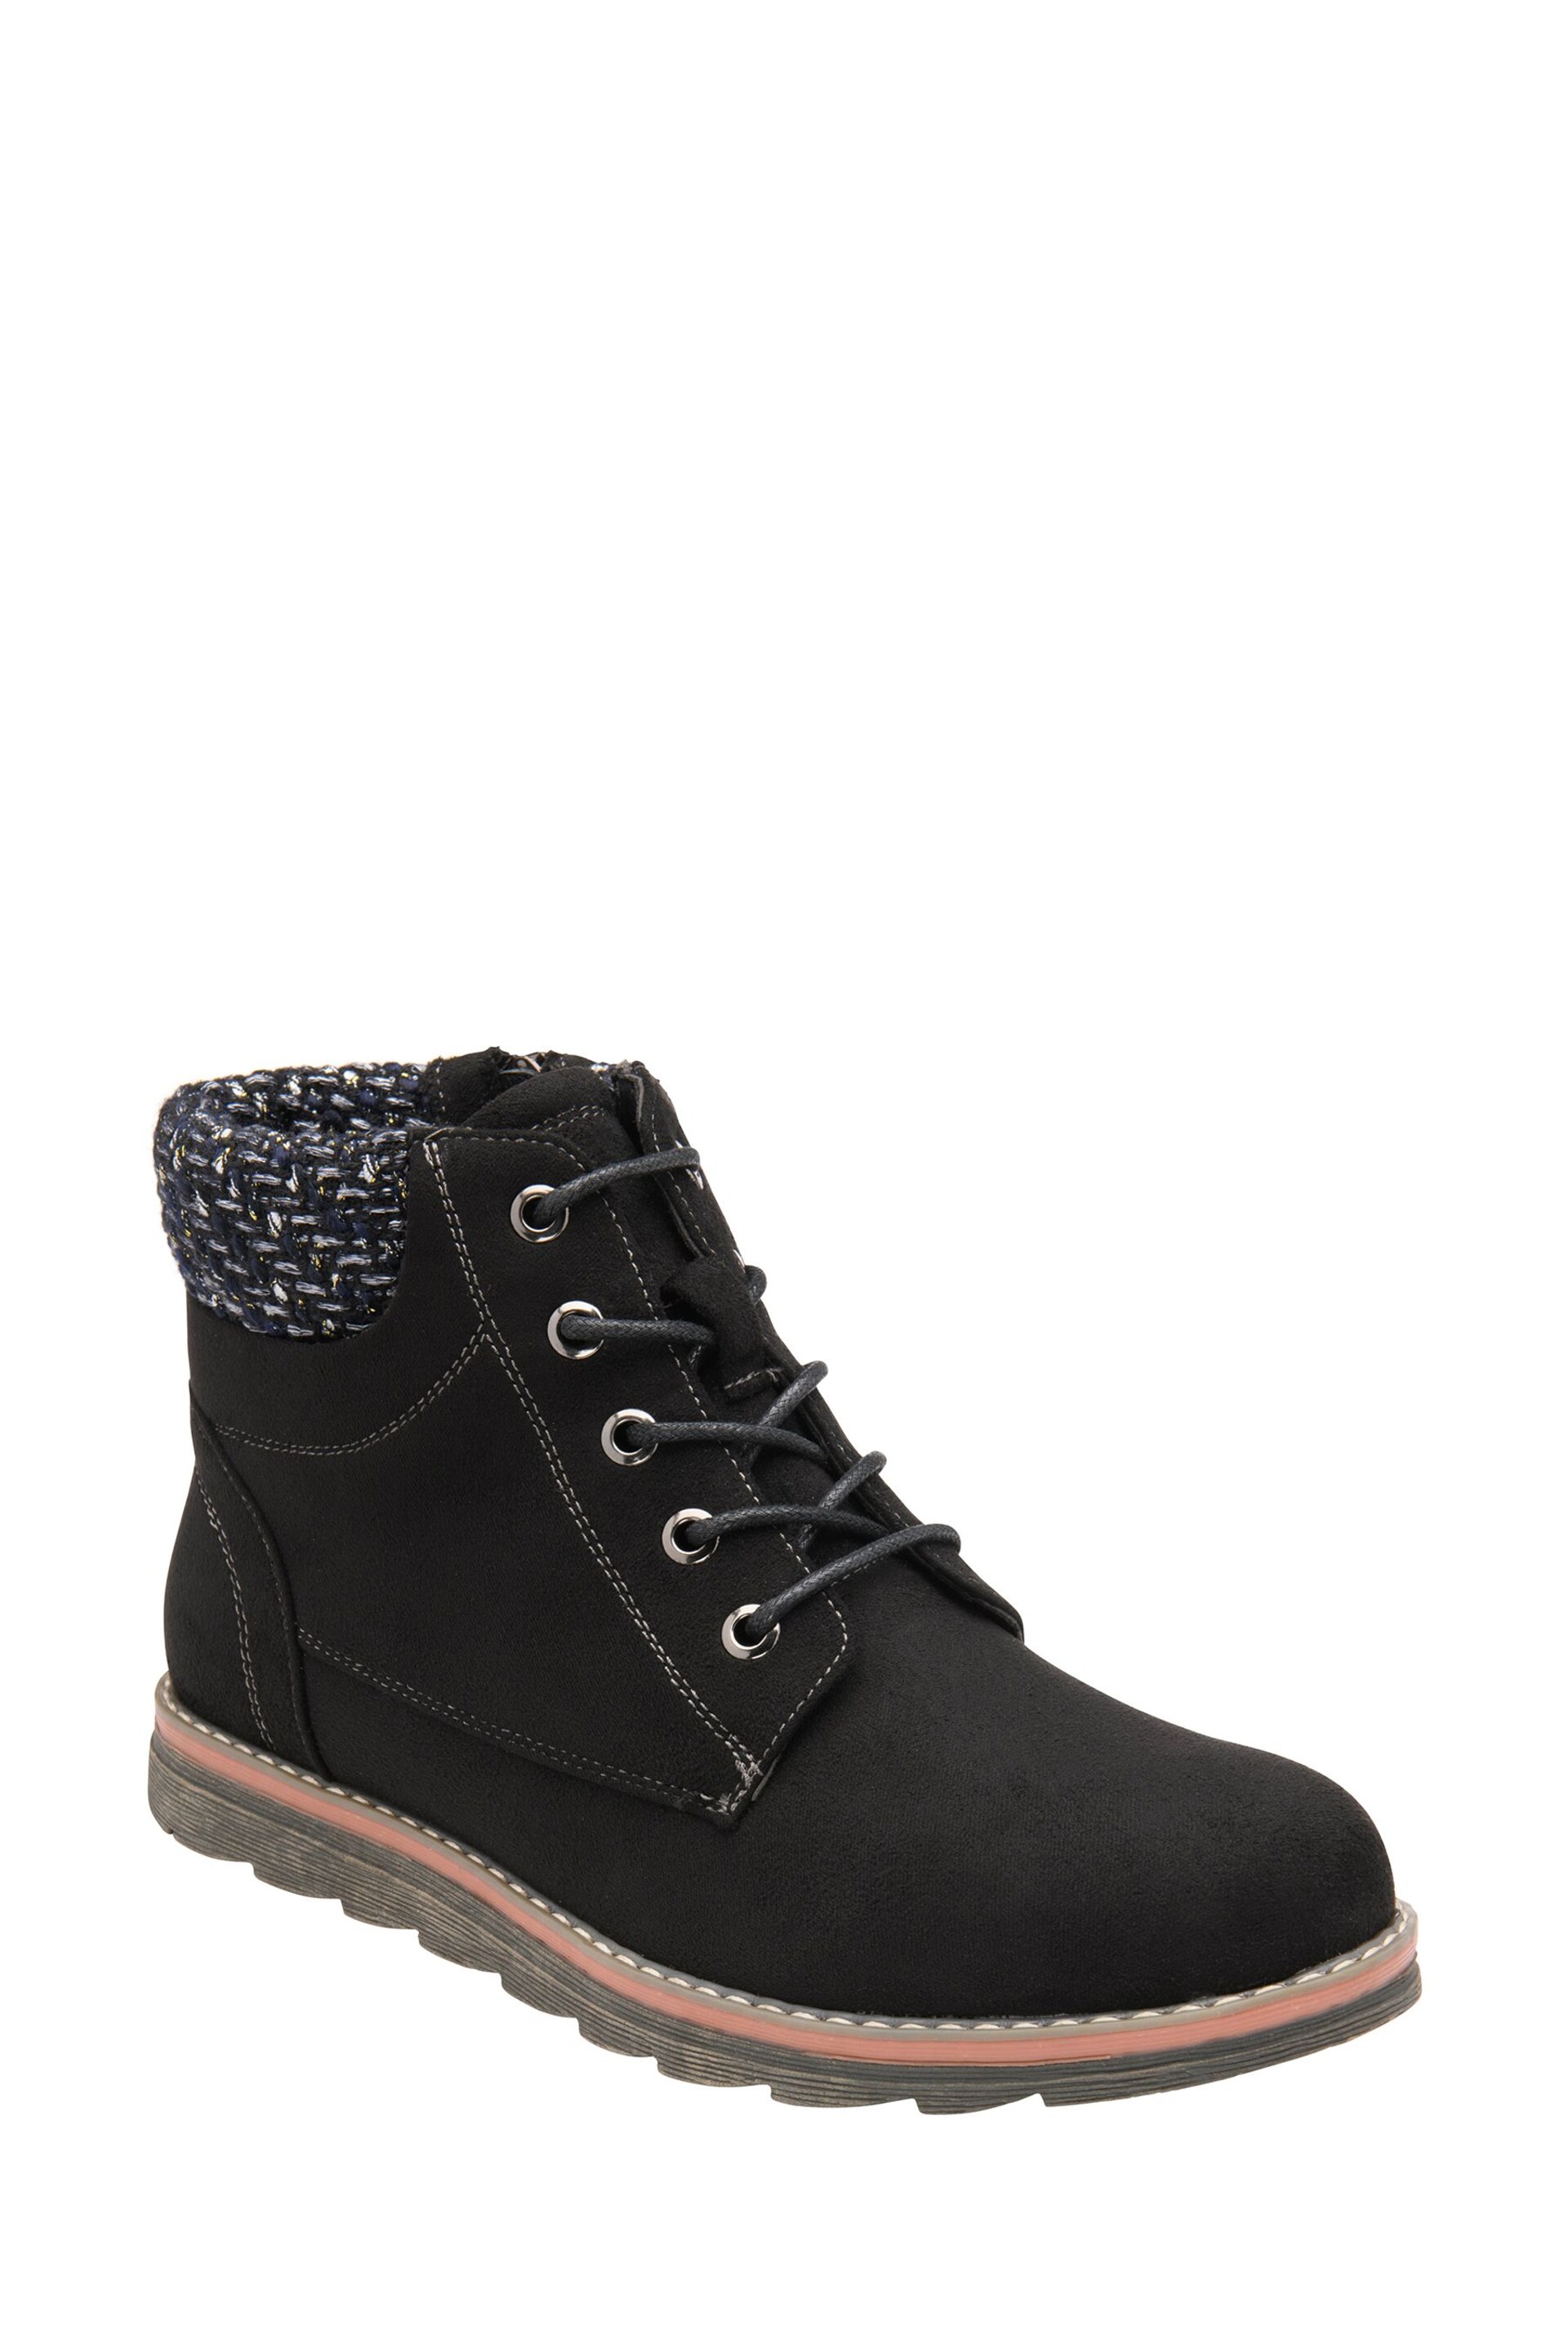 Lotus Black Lace-Up Ankle Boots - Image 1 of 4